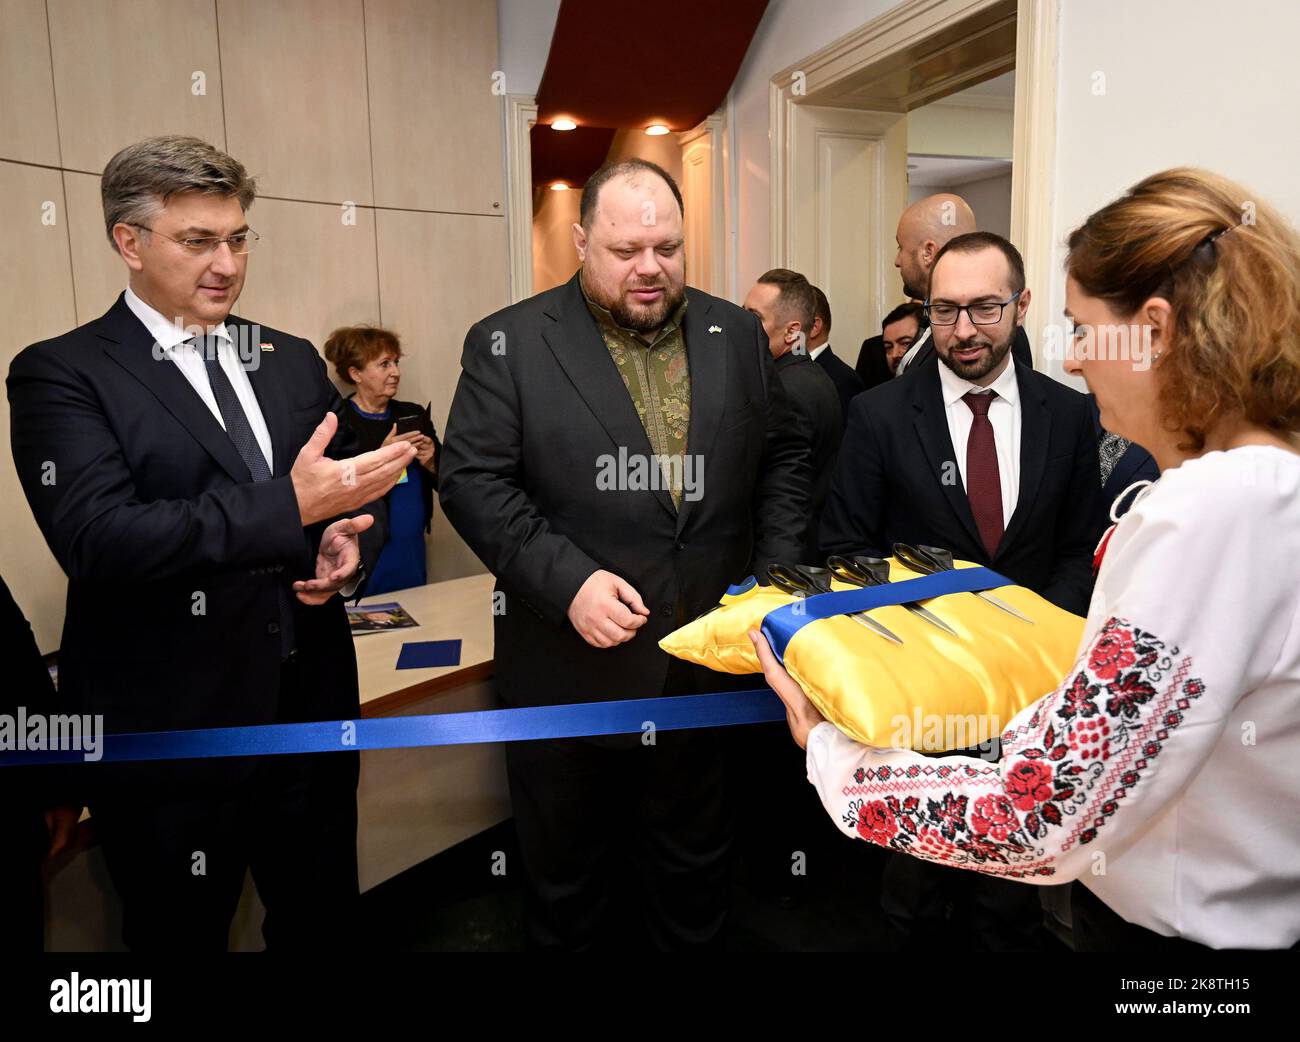 On the occasion of the Crimean Summit in Zagreb, the House of Ukraine  located in the building of the Ukrainian Community in Zagreb was  ceremoniously opened in Tomićeva Street. At the opening